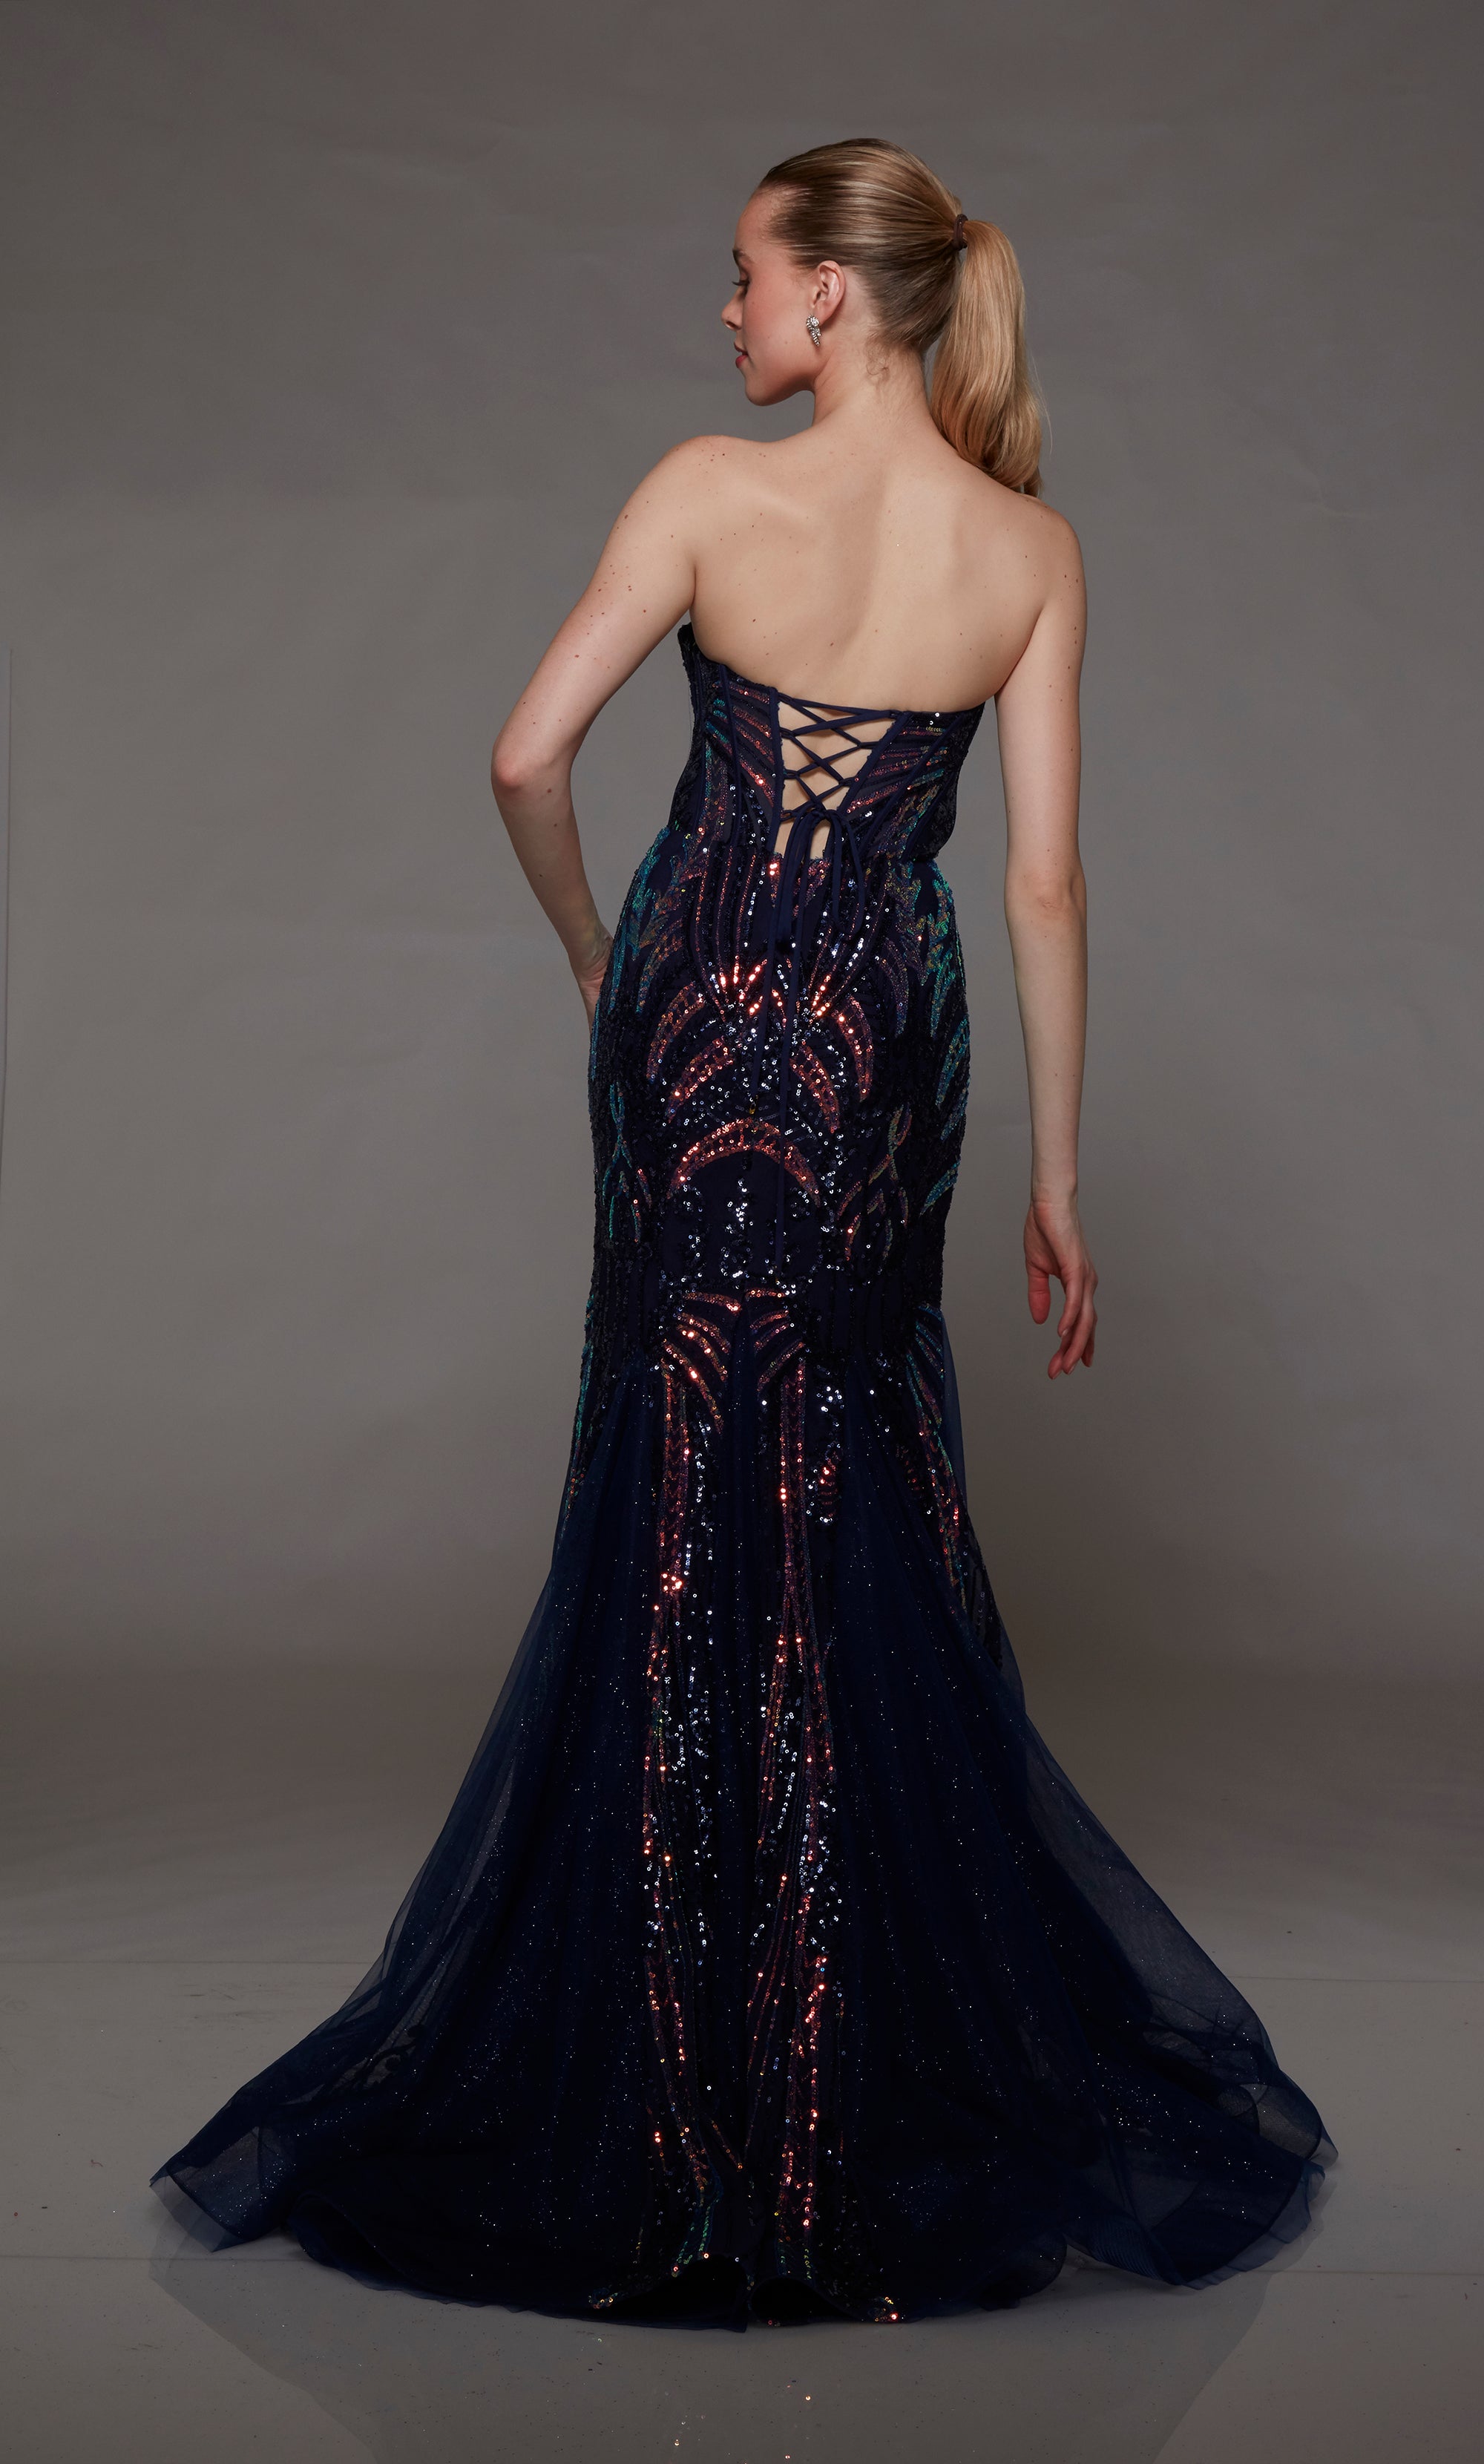 Navy blue mermaid dress: Strapless neckline, keyhole cutout, playful iridescent sequin detail. Back features an lace-up closure for the perfect fit.